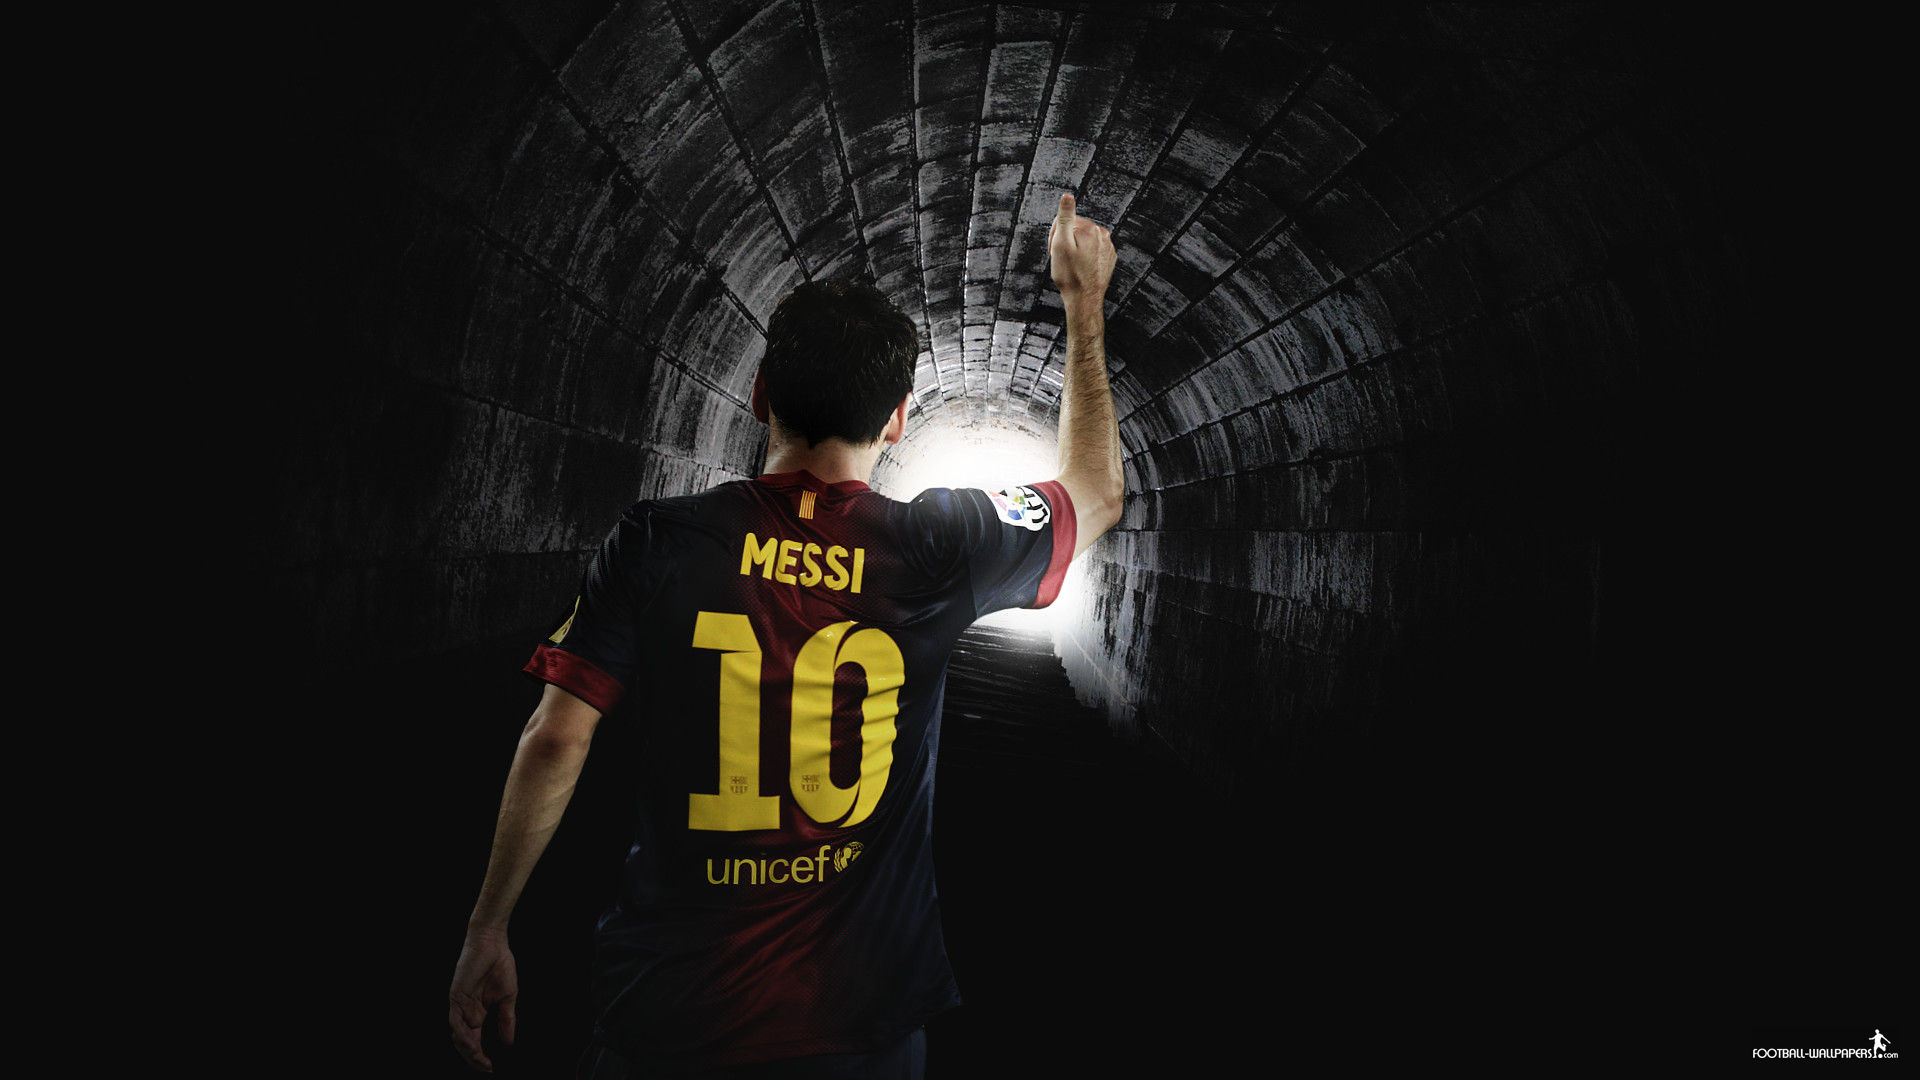 Messi Football Player Wallpaper Players Teams Leagues